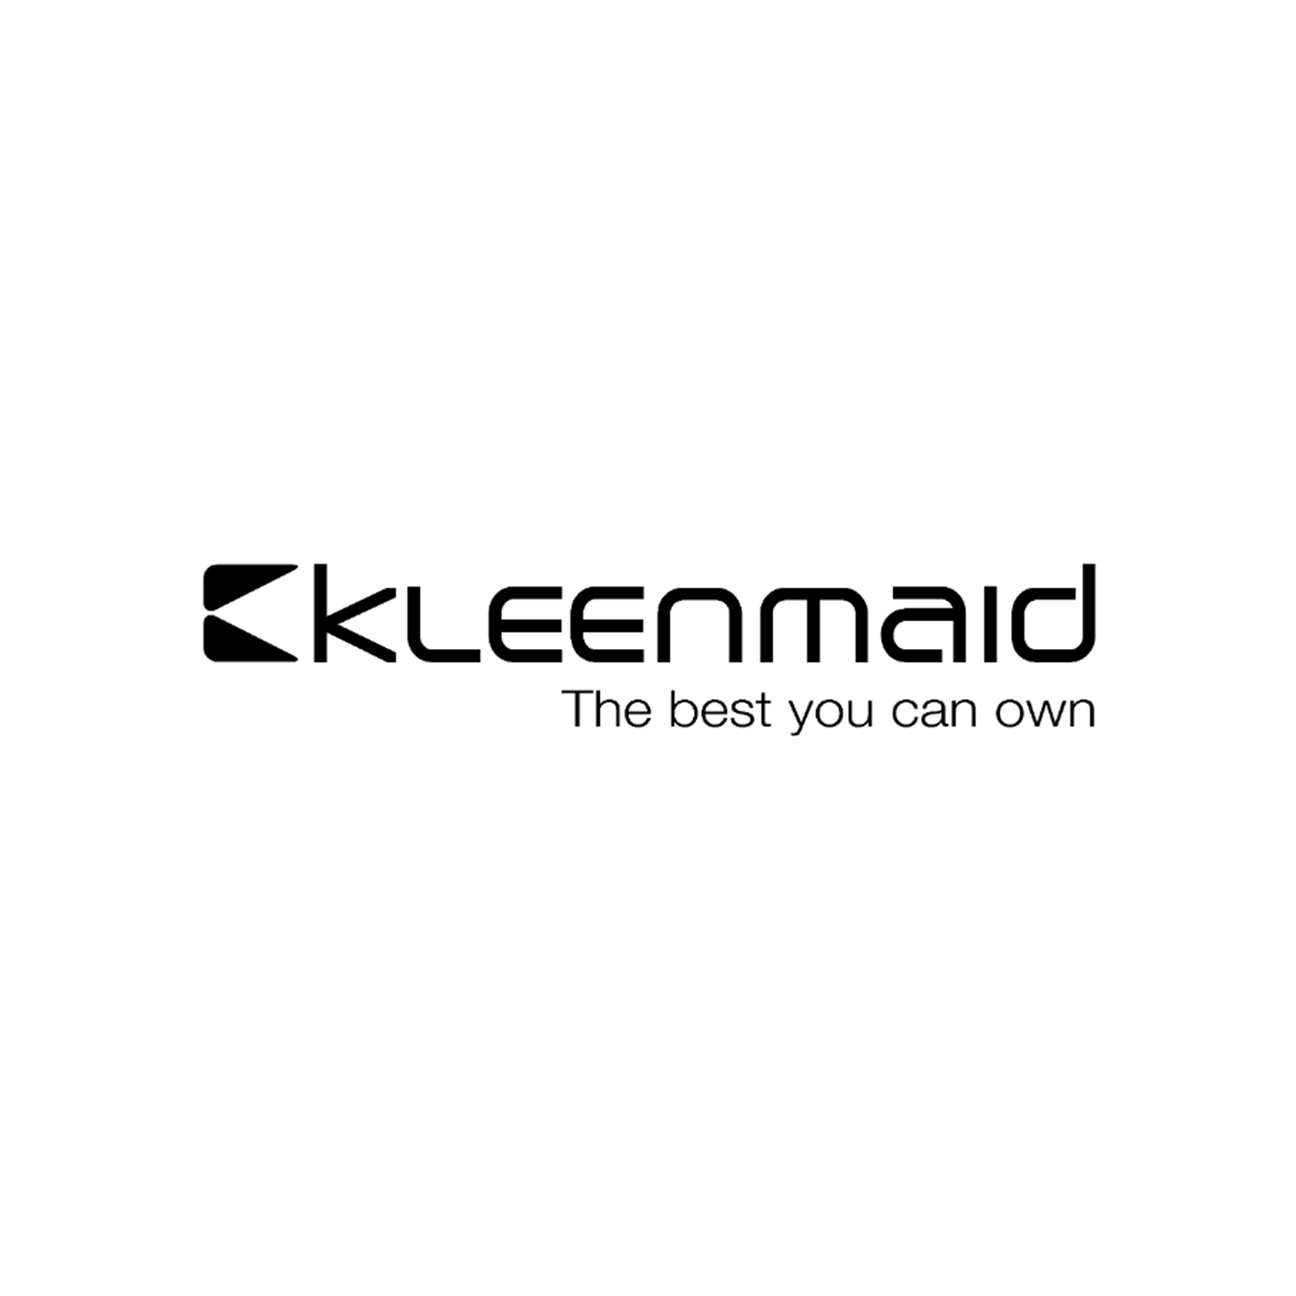 Kleenmaid Cooktop & Oven Parts - My Oven Spares